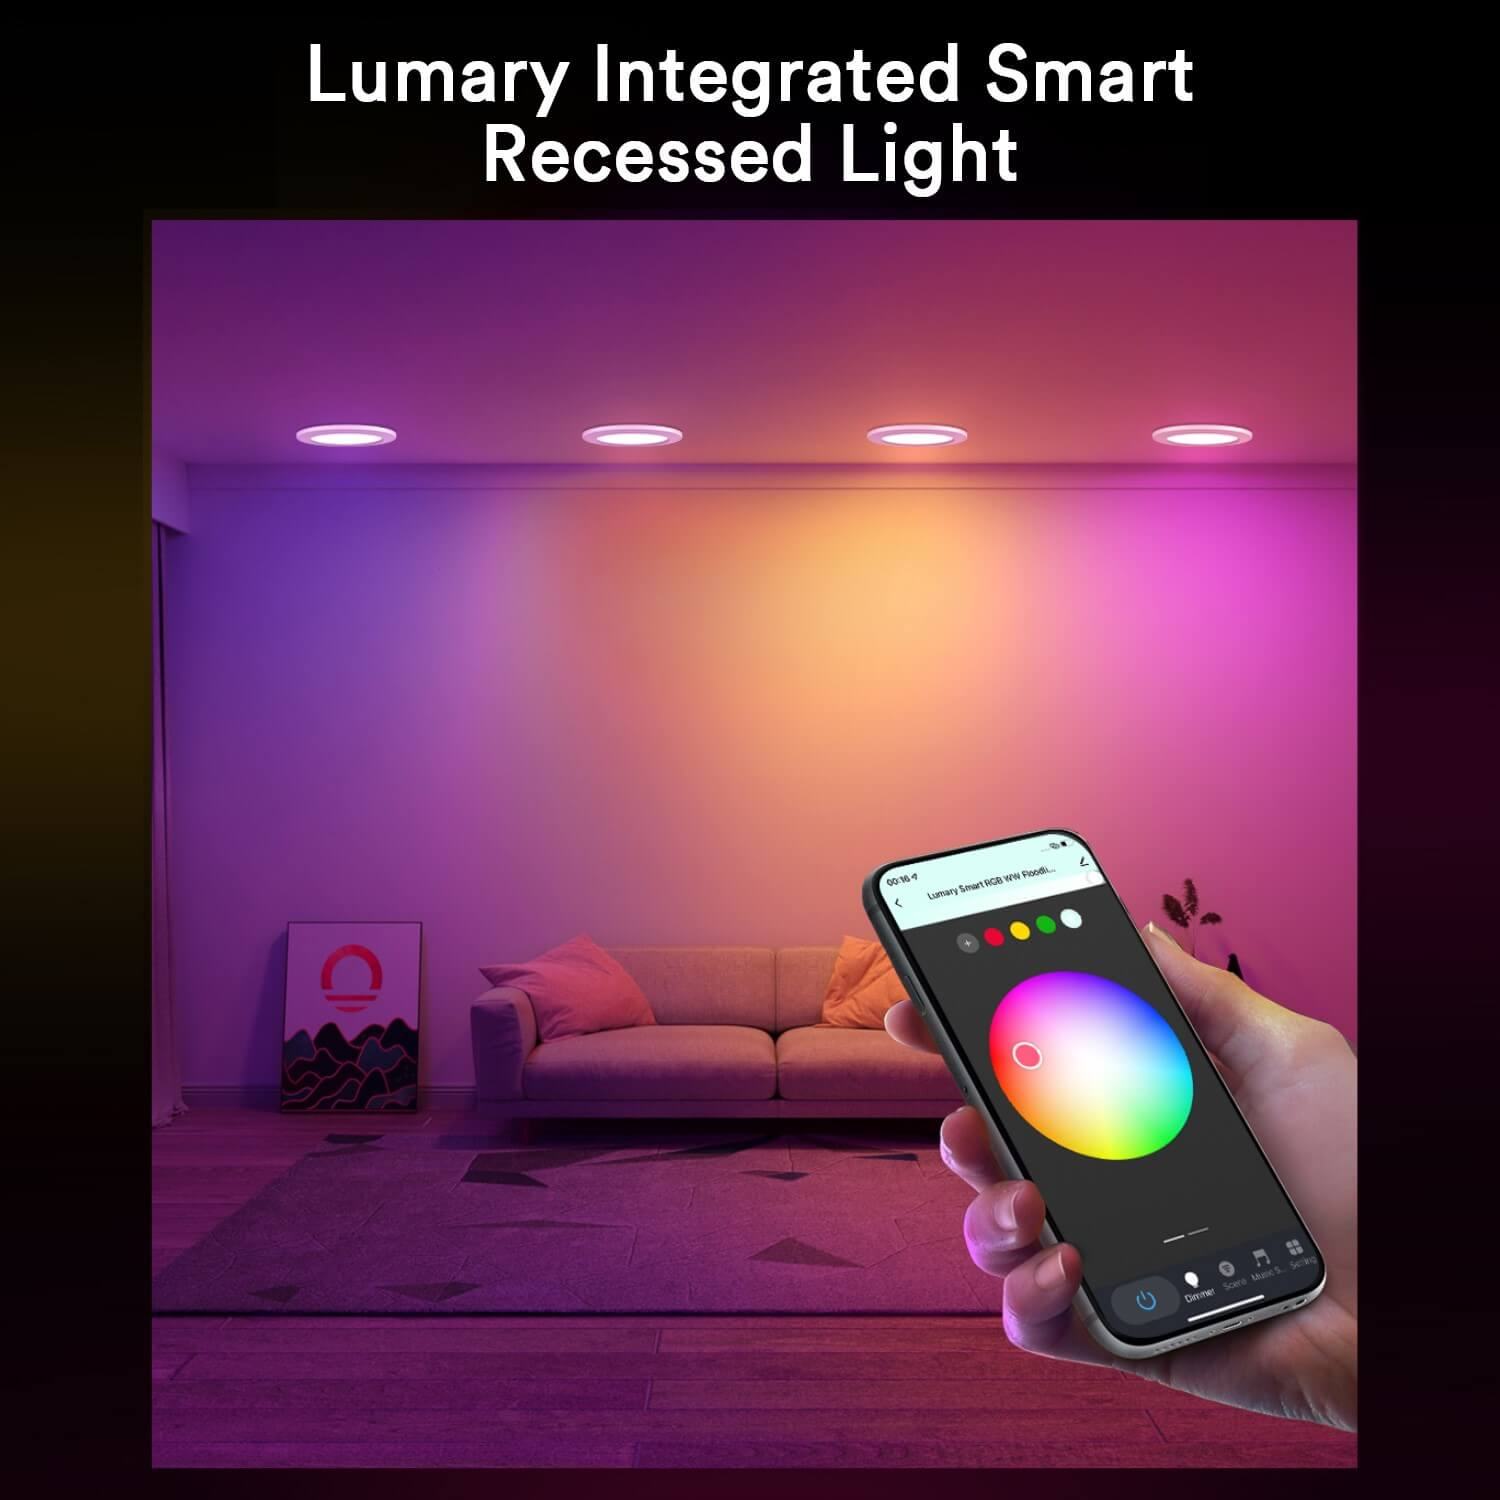 Lumary Inch Integrated Smart Recessed Lighting with Junction Box 13W